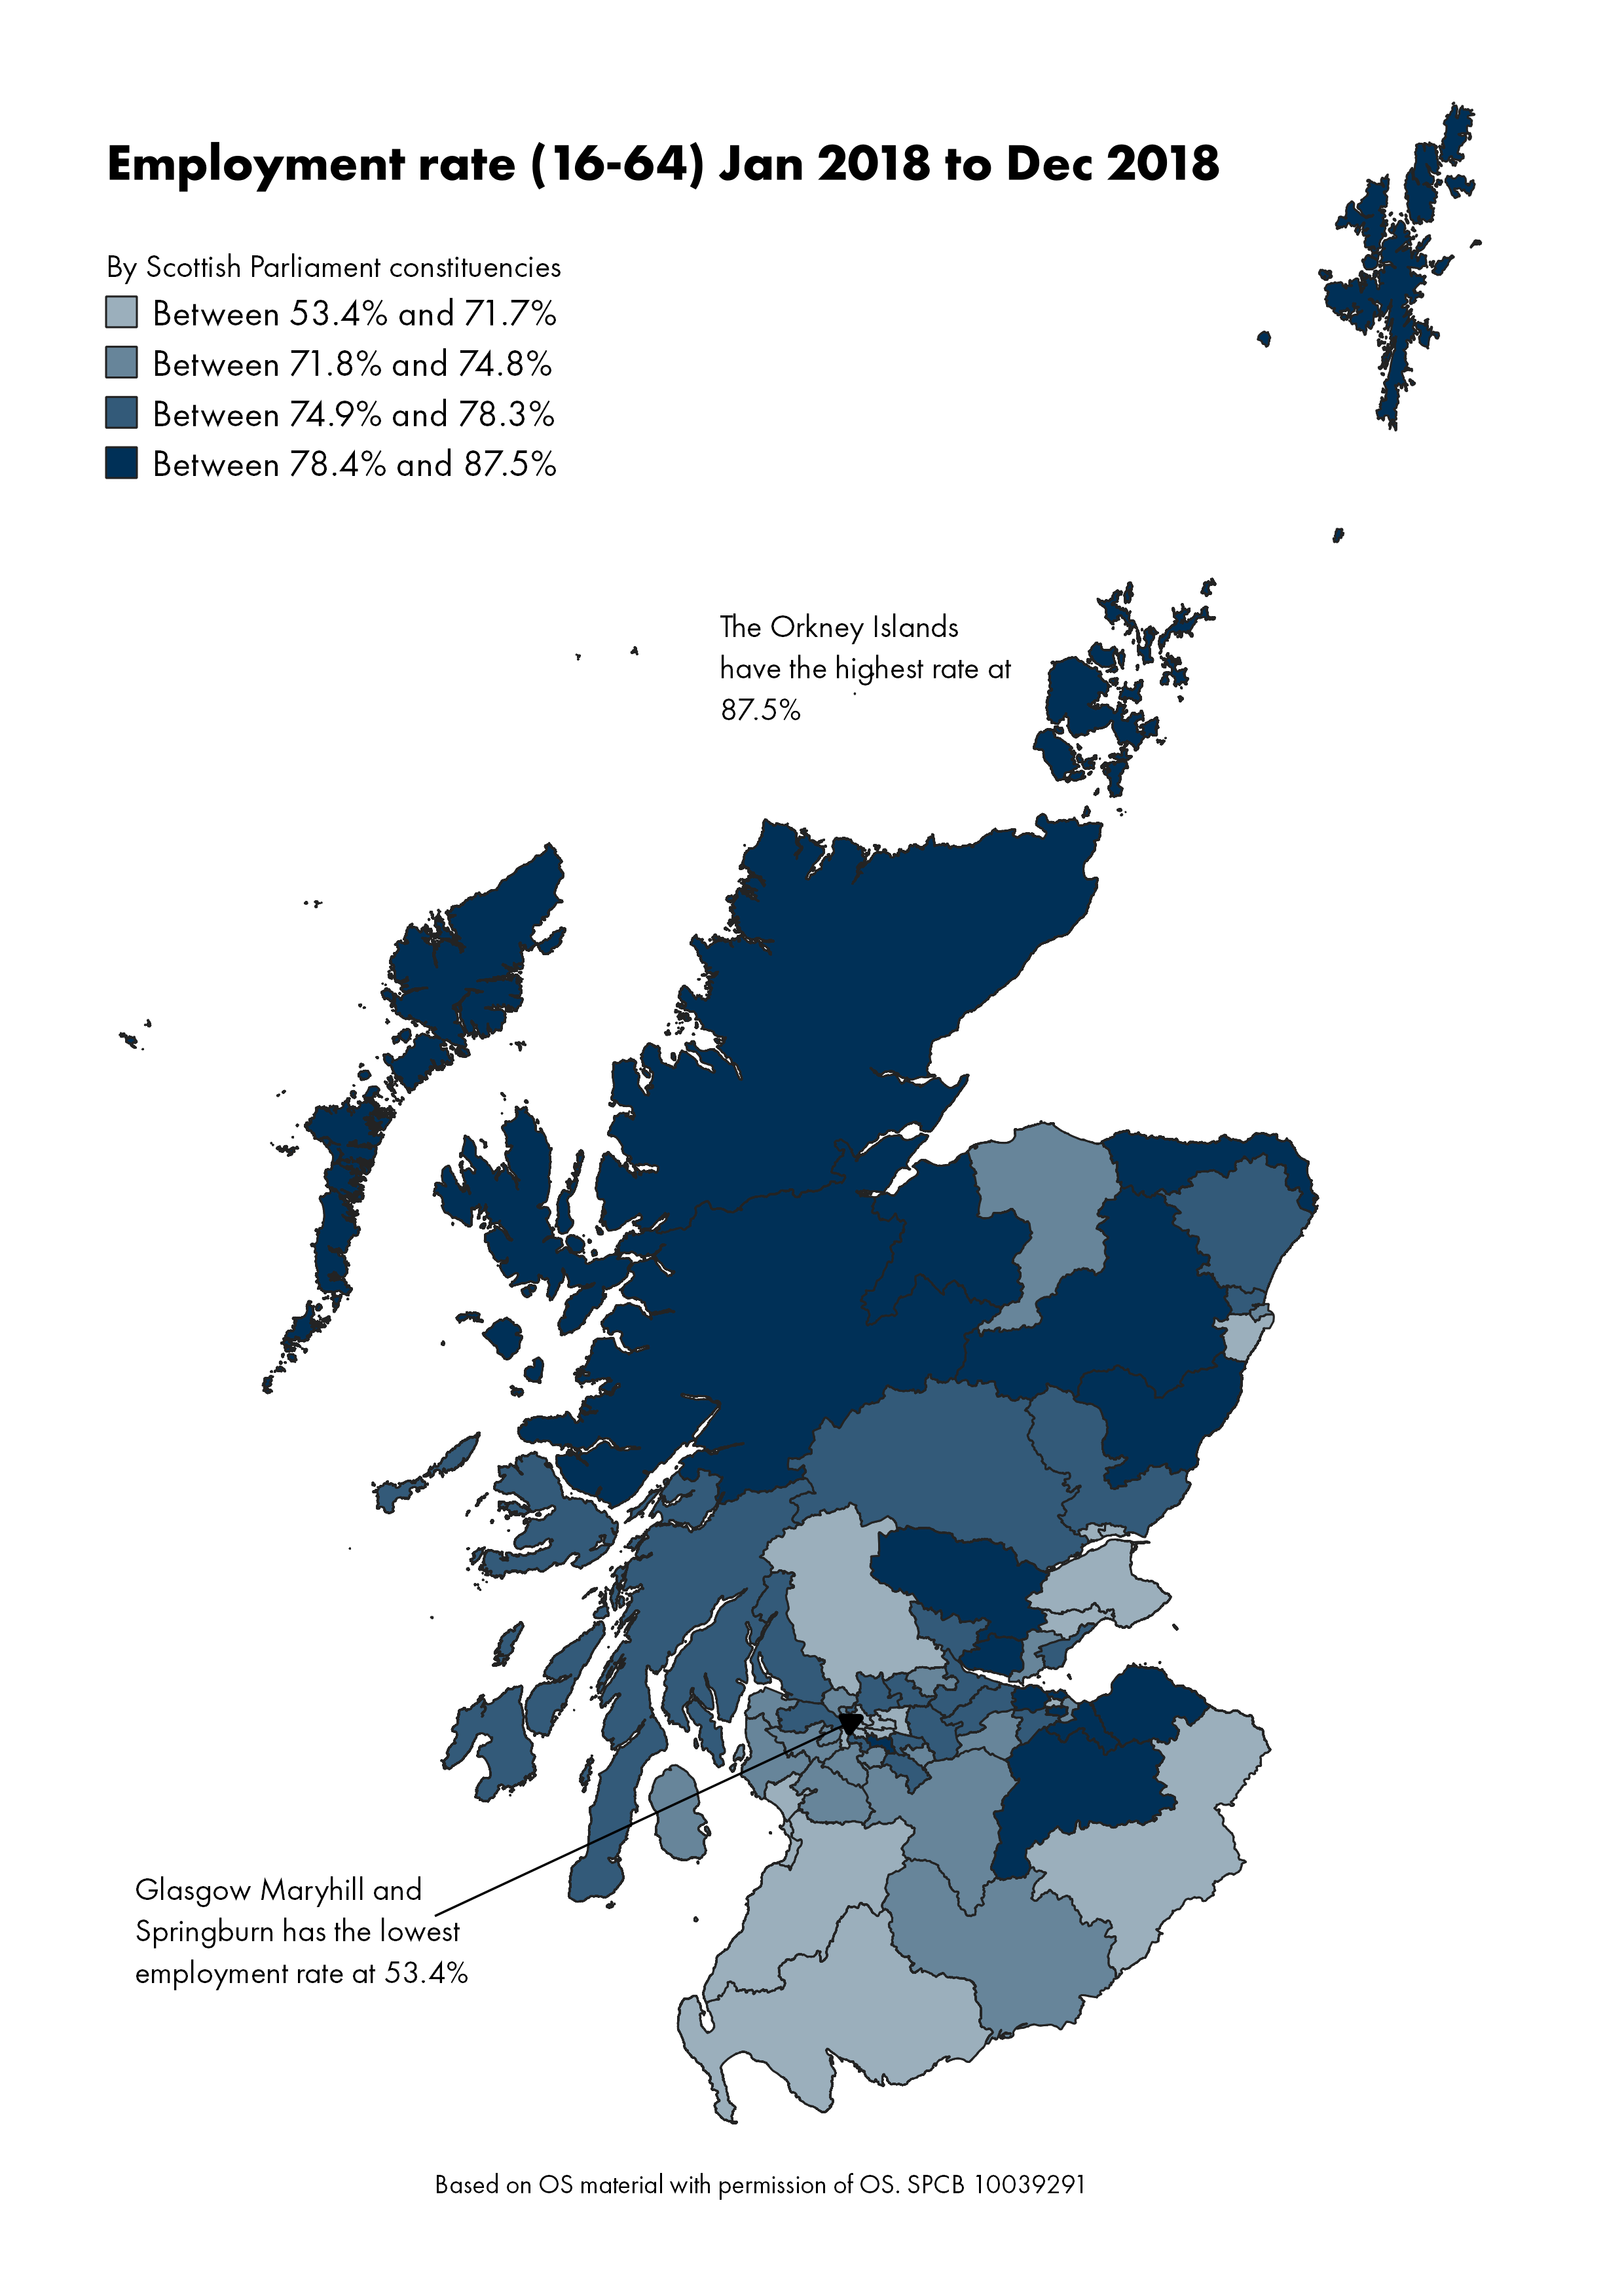 The unemployment rates for people aged between 16 and over for each Scottish Parliamentary constituency.